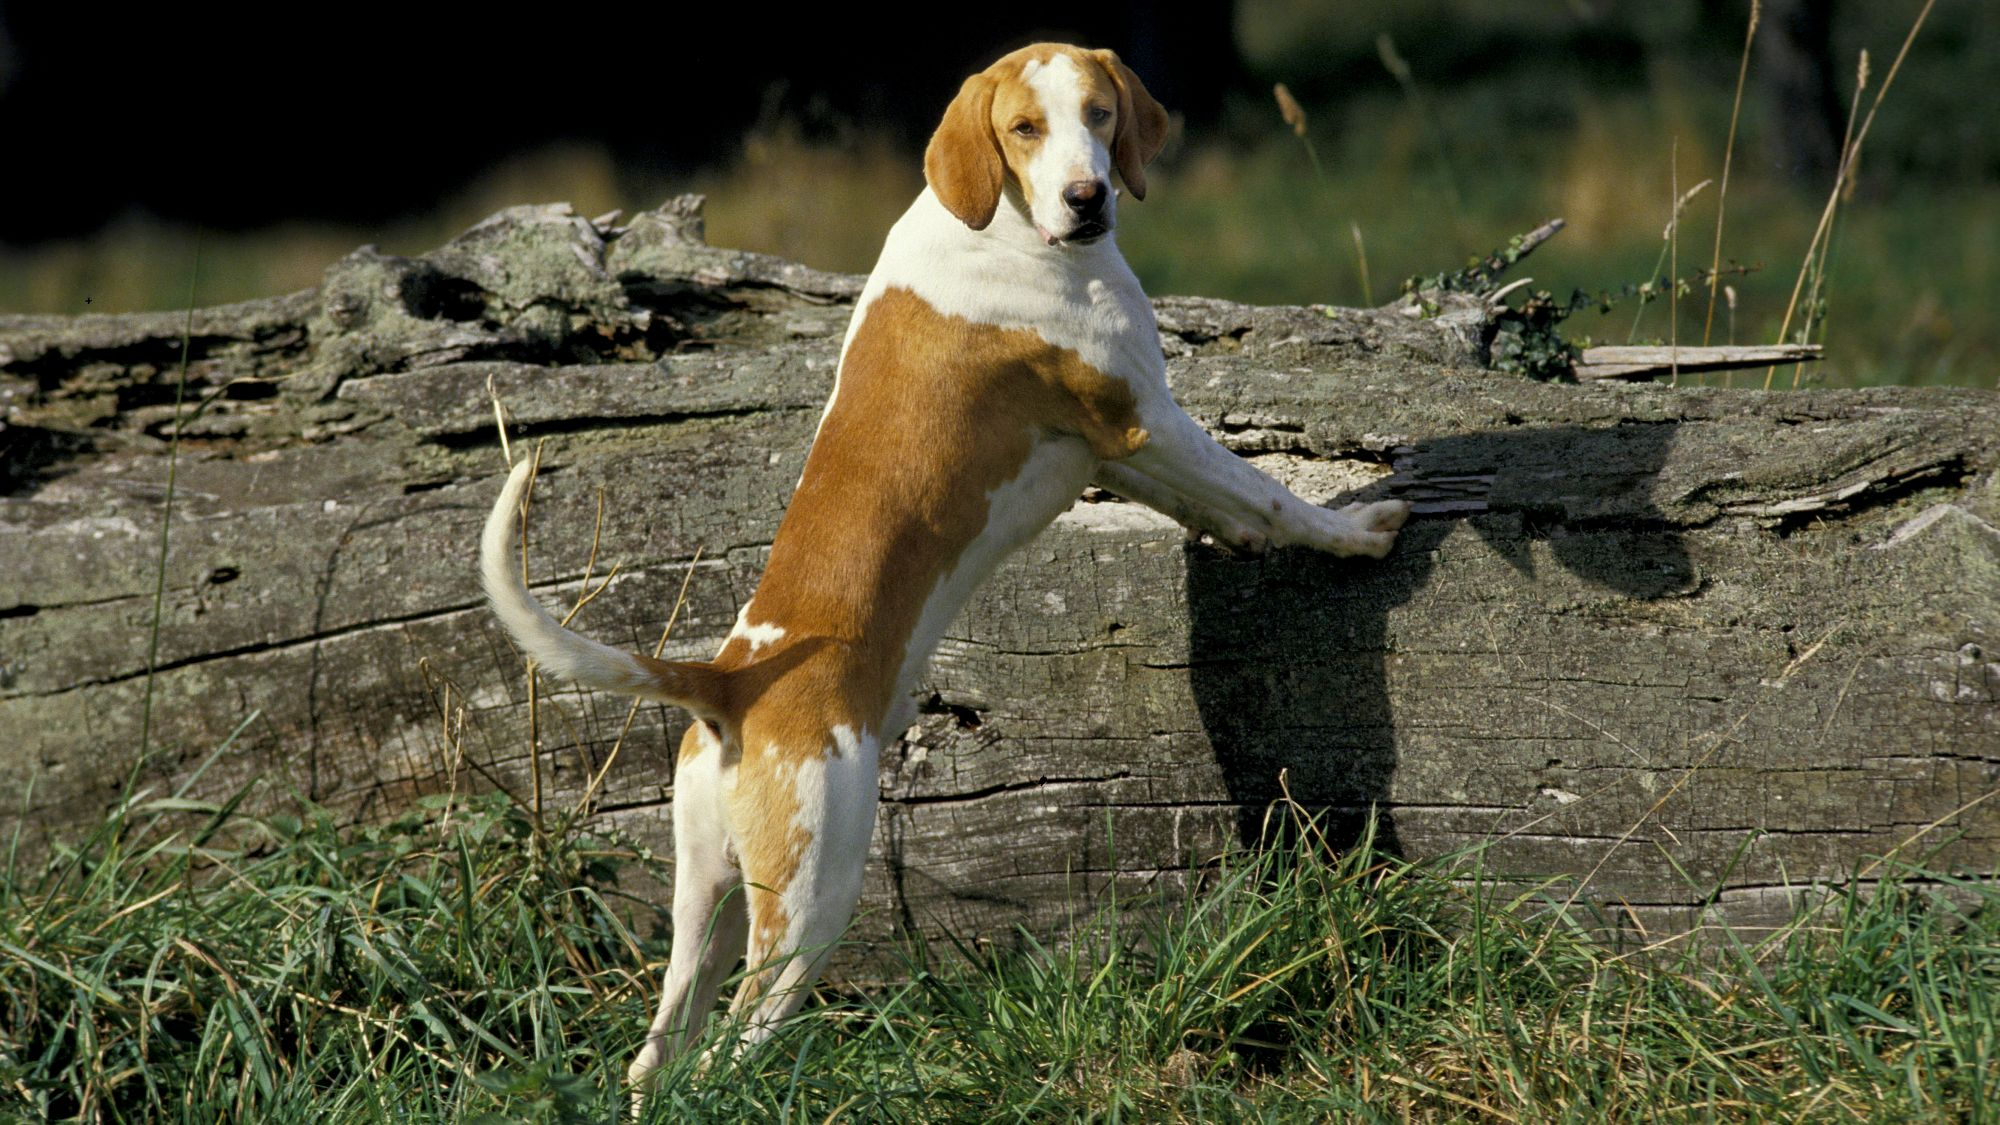 Great Angle Francais White and Orange Hound stood with front paw up on fallen log